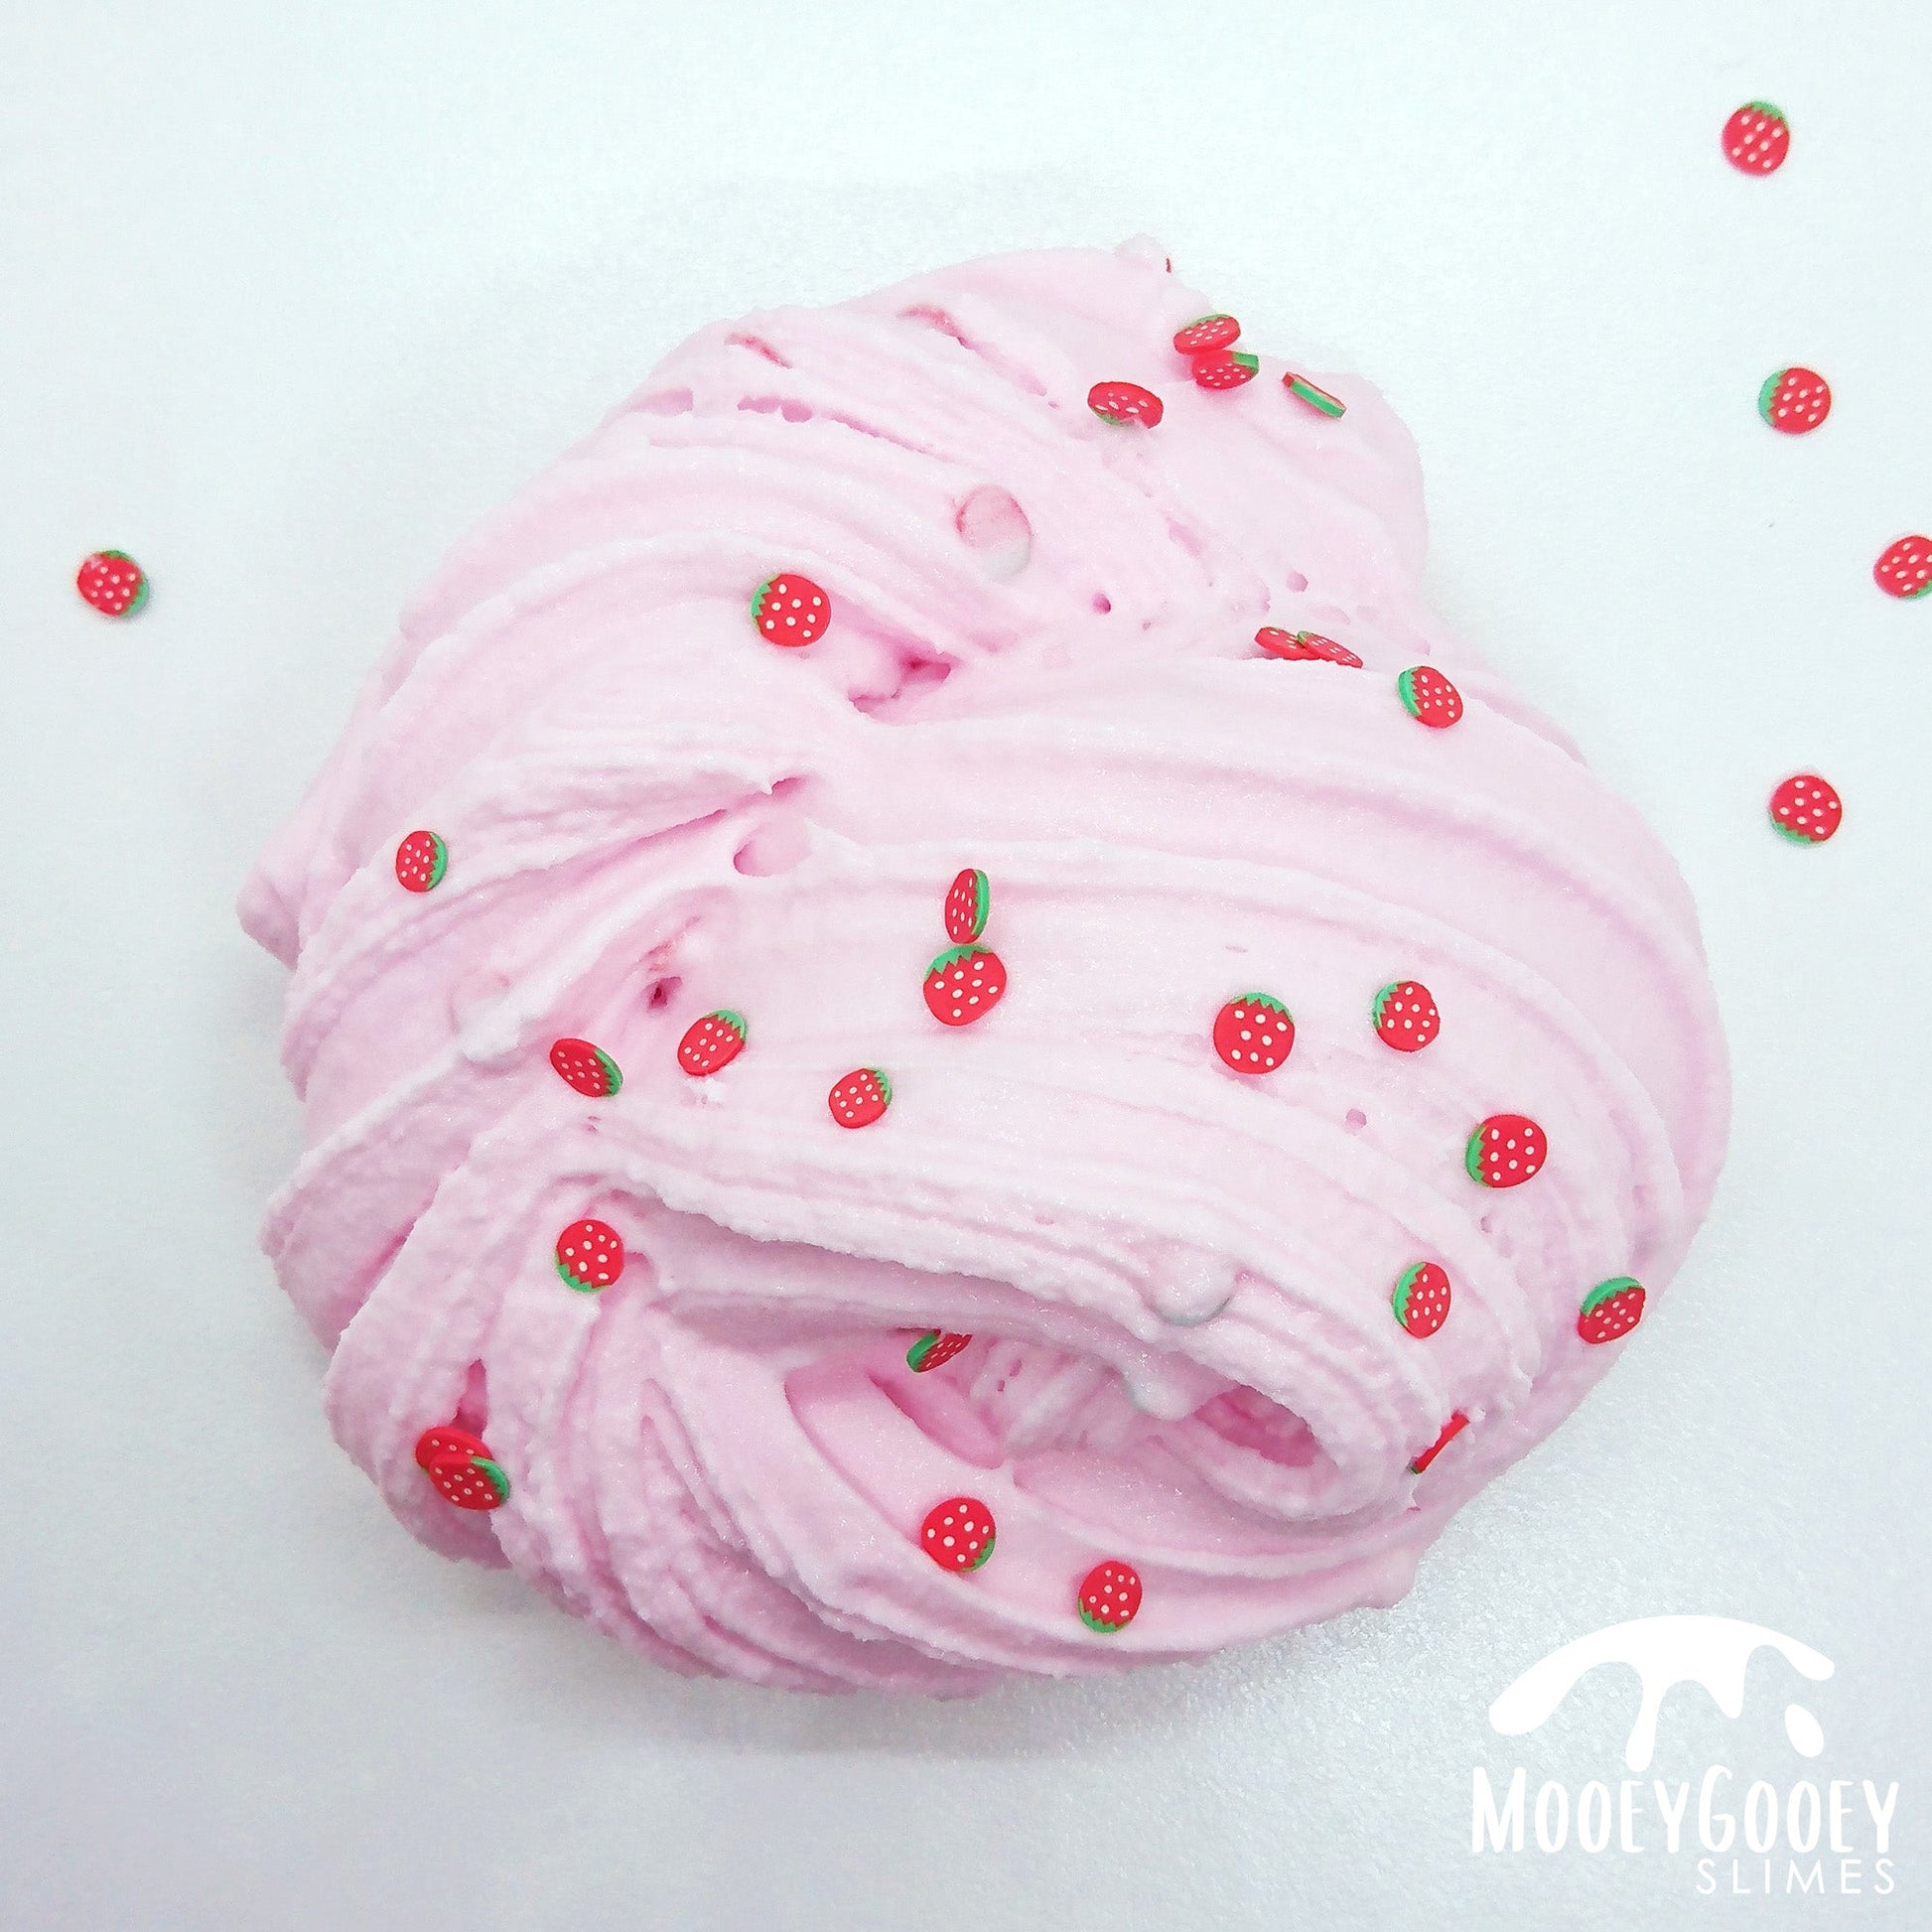 Strawberry Bliss - Cloud Creme Slime